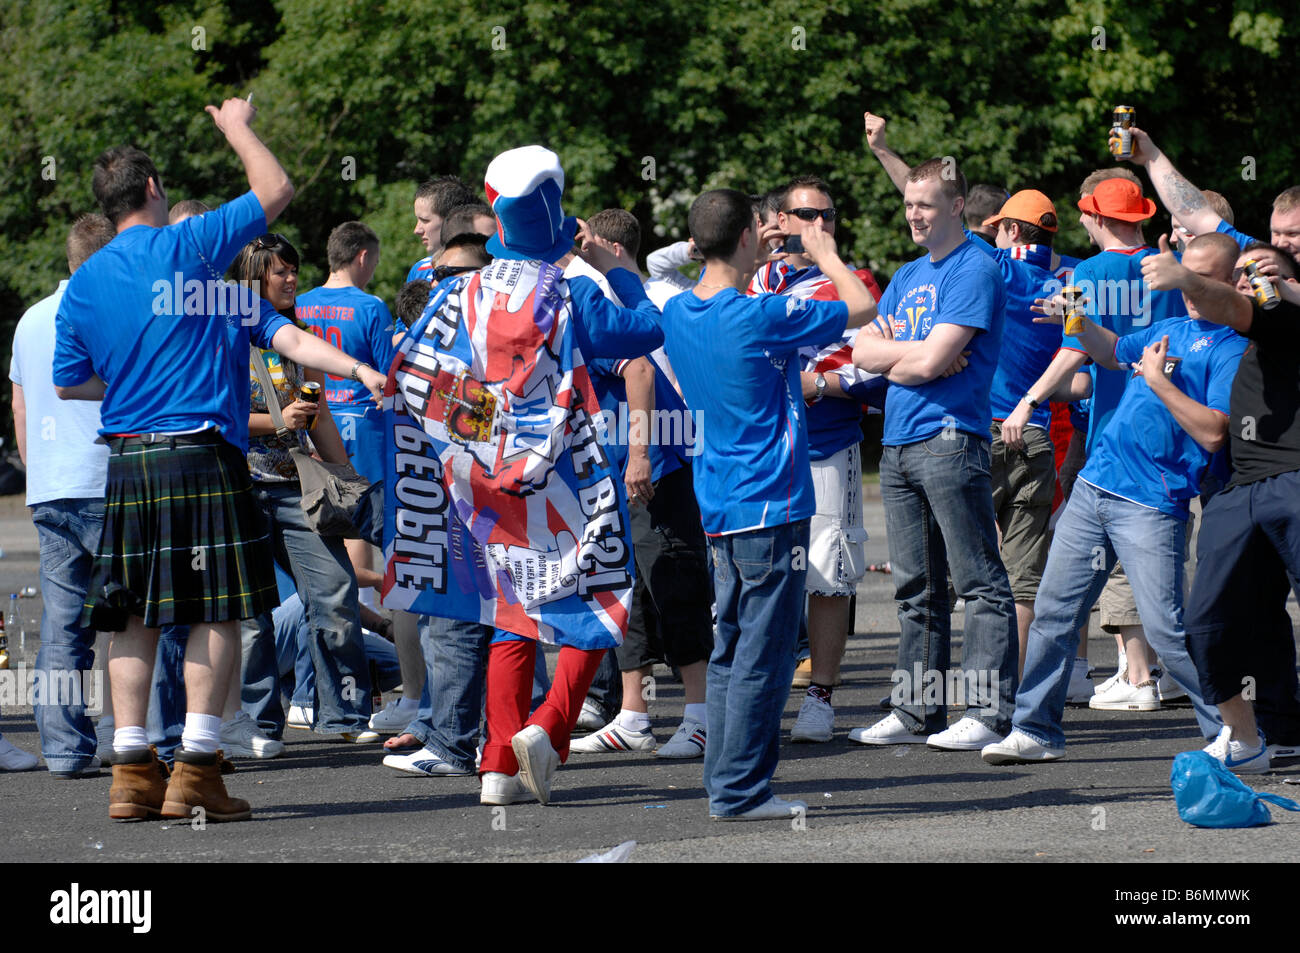 Glasgow Rangers fans gather at a motorway service area before the UEFA Cup Final 2008 against Zenit St Petersburg Stock Photo